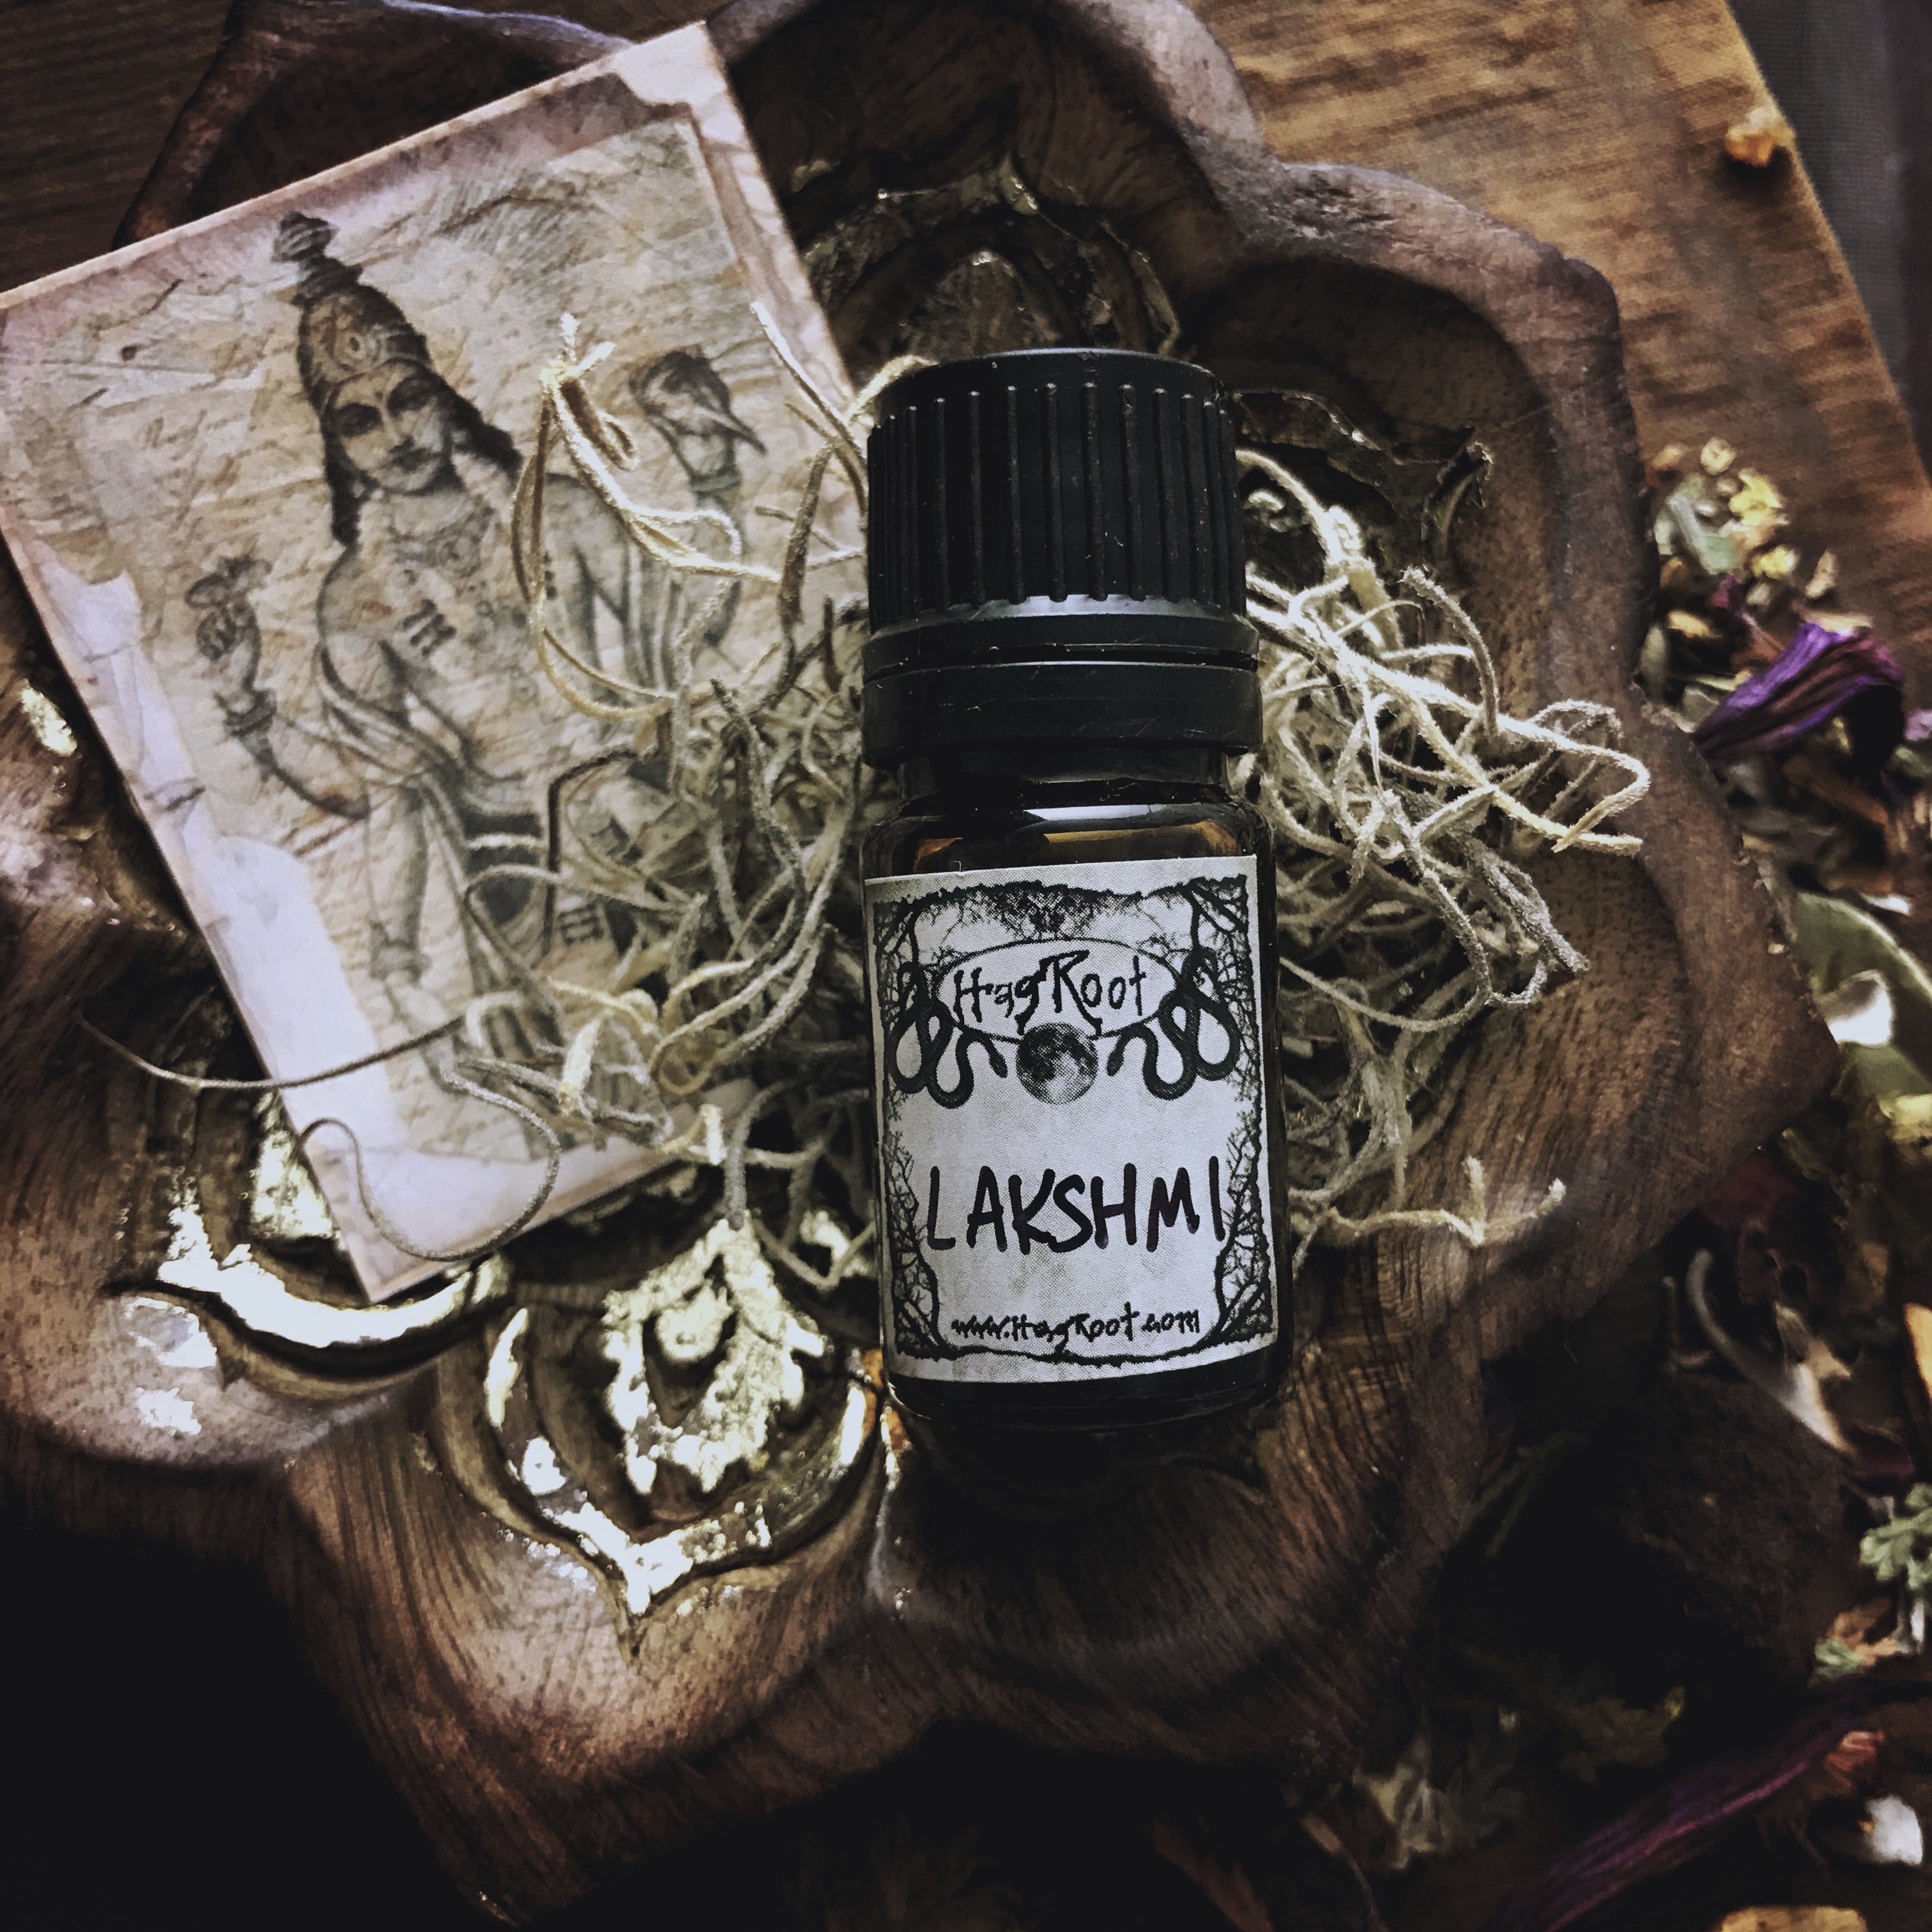 LAKSHMI-(Nag Champa, Frankincense Tears, Indian Spices, Osmanthus Blossoms, Sandalwood)-Perfume, Cologne, Anointing, Ritual Oil